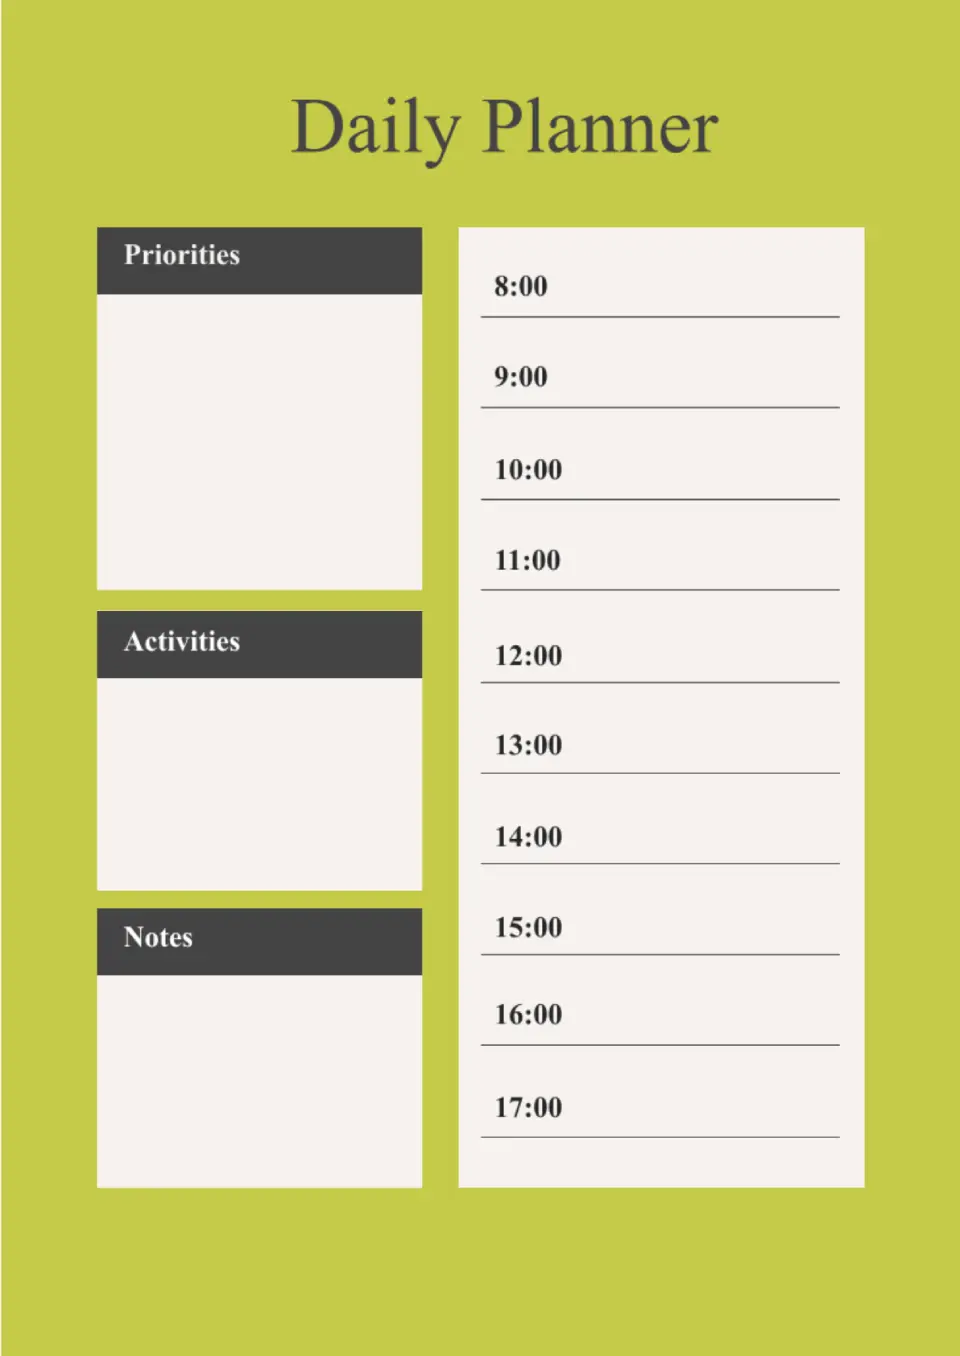 Daily Planner Template for Google Docs